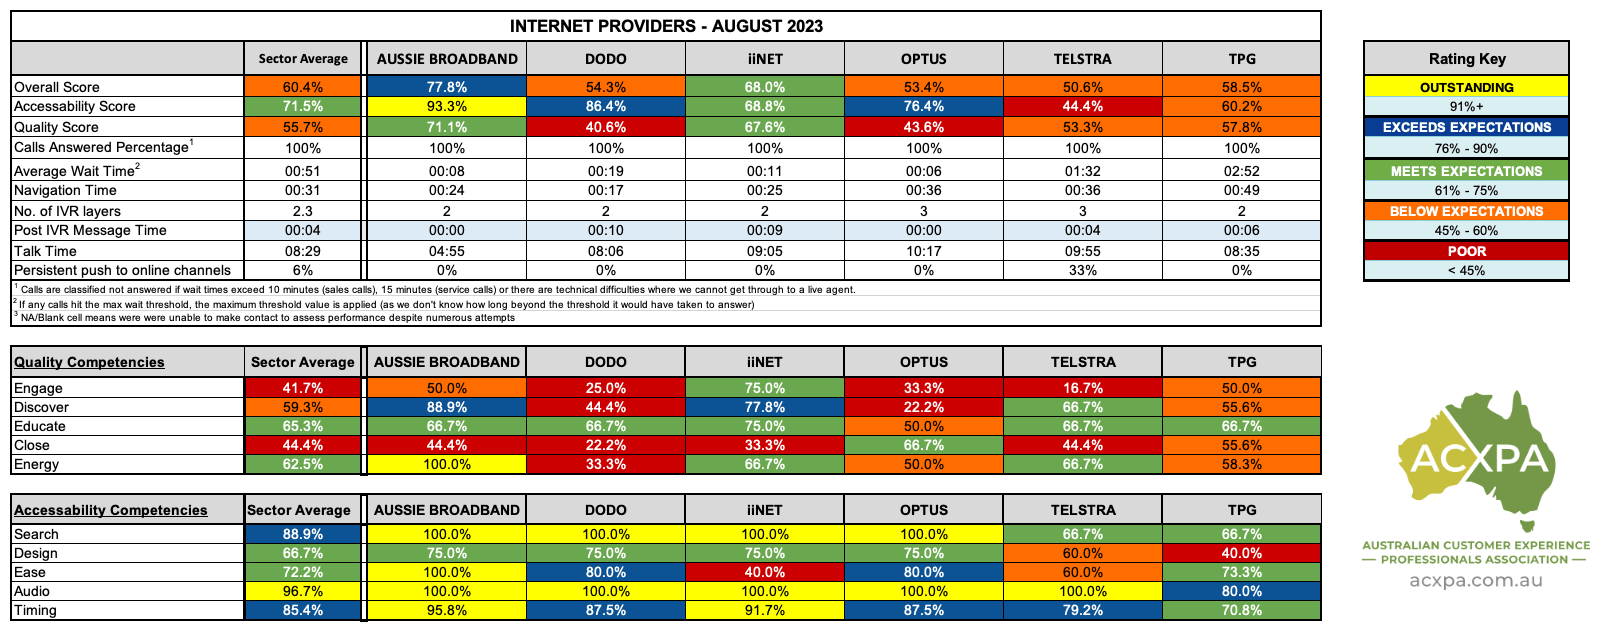 Internet Providers August 2023 Results